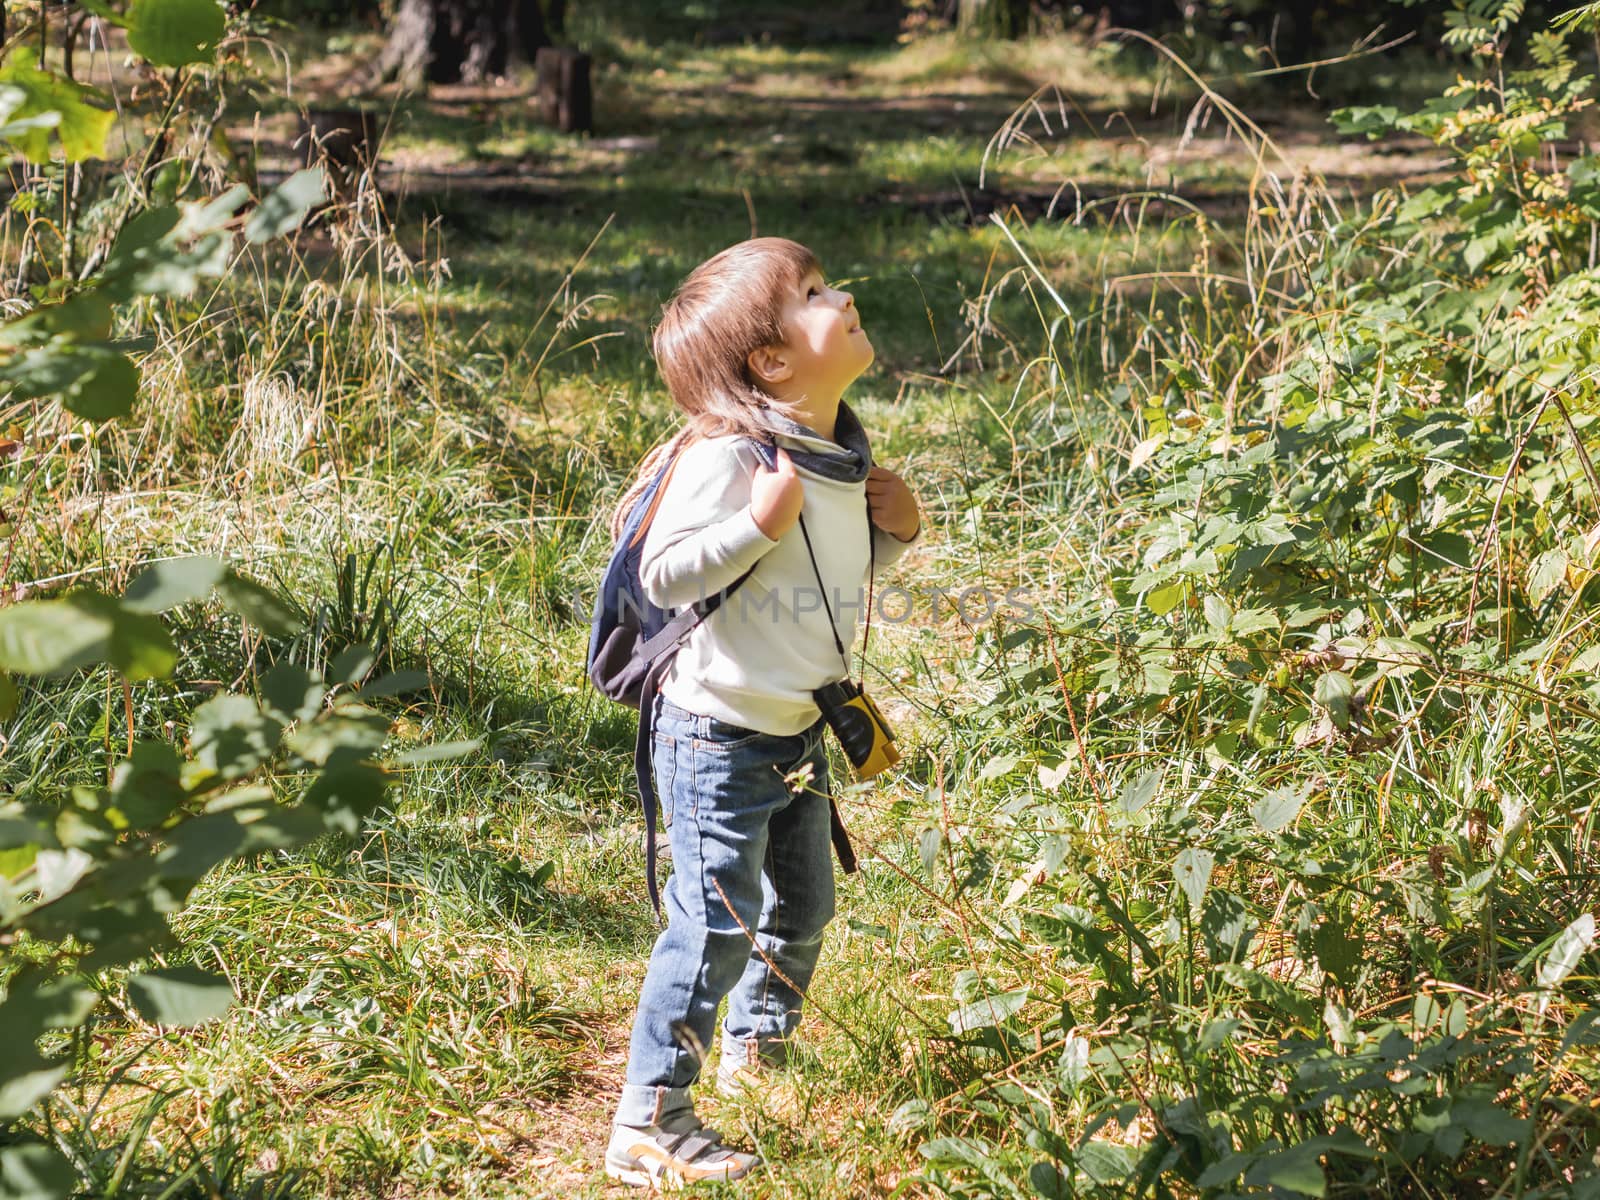 Curious boy is hiking in forest lit by sunlight. Outdoor leisure activity for kids. Child with binoculars and backpack. Summer journey fot little tourist. Adventure time.